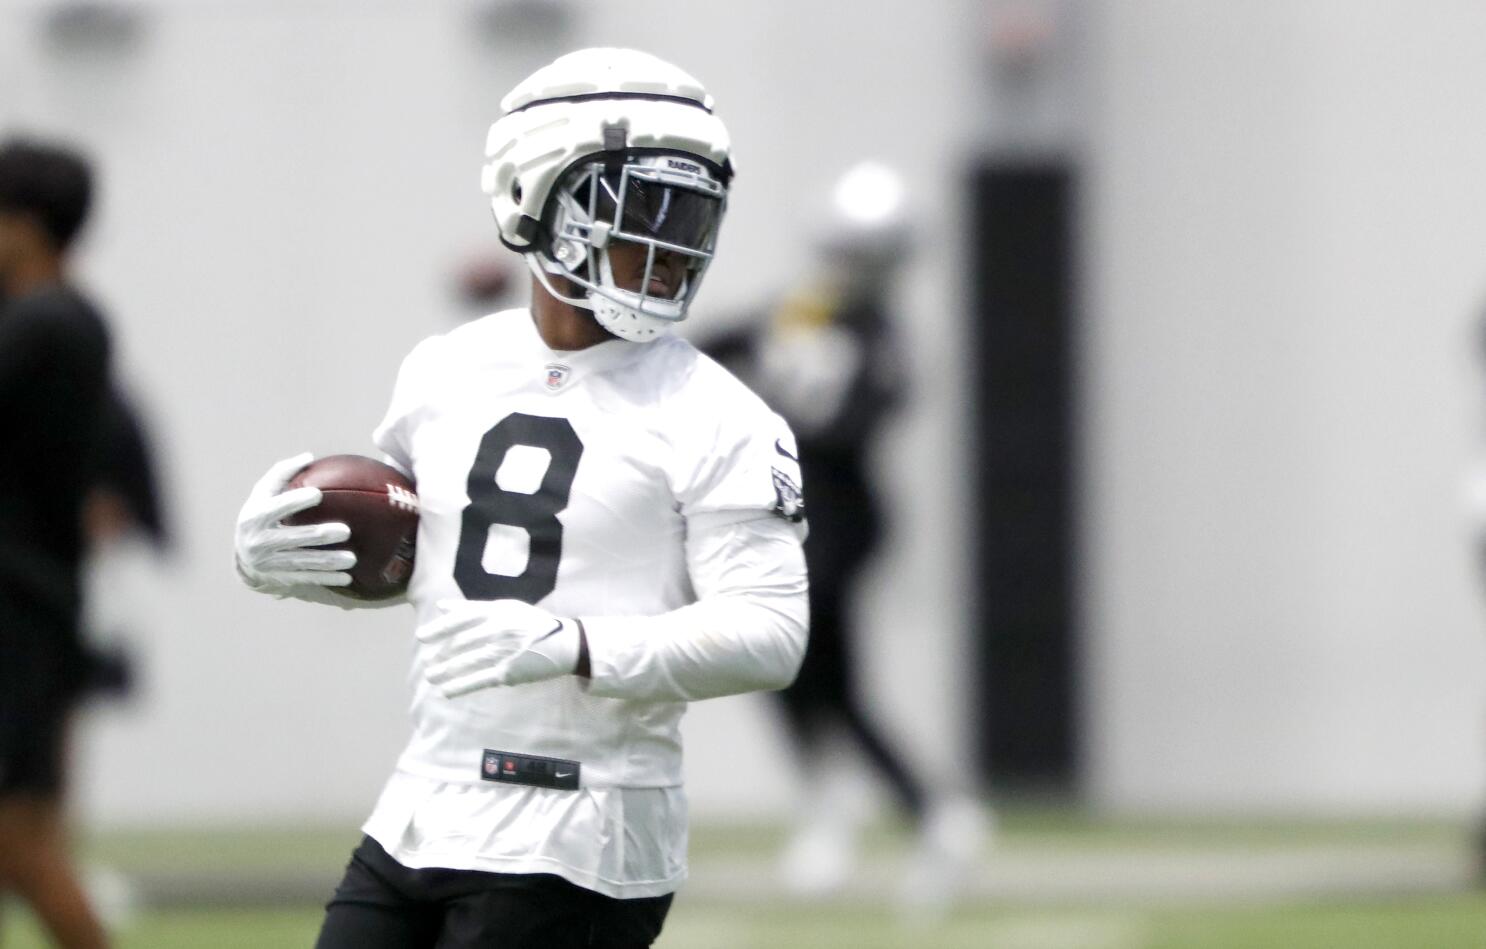 Josh Jacobs says his contract situation is behind him as he and